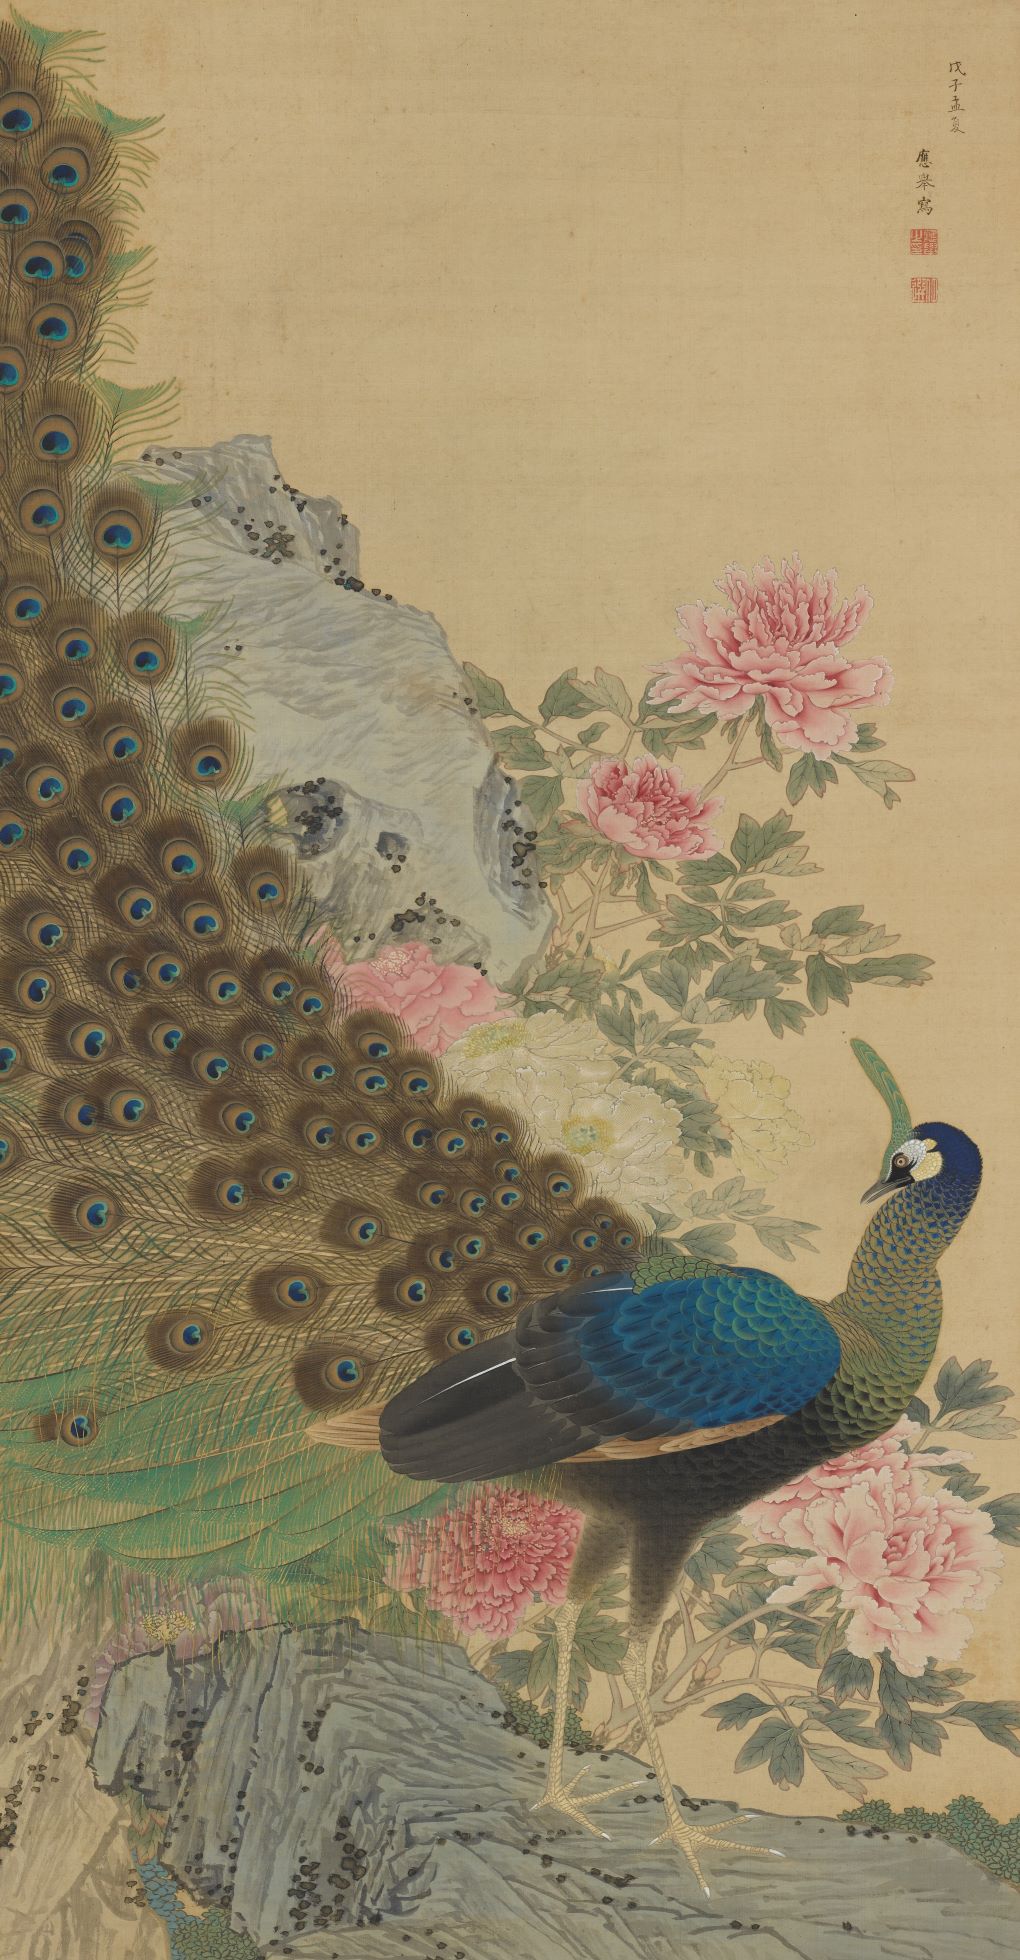 Image Credits: Maruyama Ōkyo, Peacock and Peonies, 1768, Edo Period, Hanging scroll; ink, color, and gold on silk, 135 x 70.6 cm (53 1/8 x 27 13/16 in.), Promised gift of Robert S. and Betsy G. Feinberg, TL42147.17, Photography by John Tsantes and Neil Greentree, © Robert Feinberg